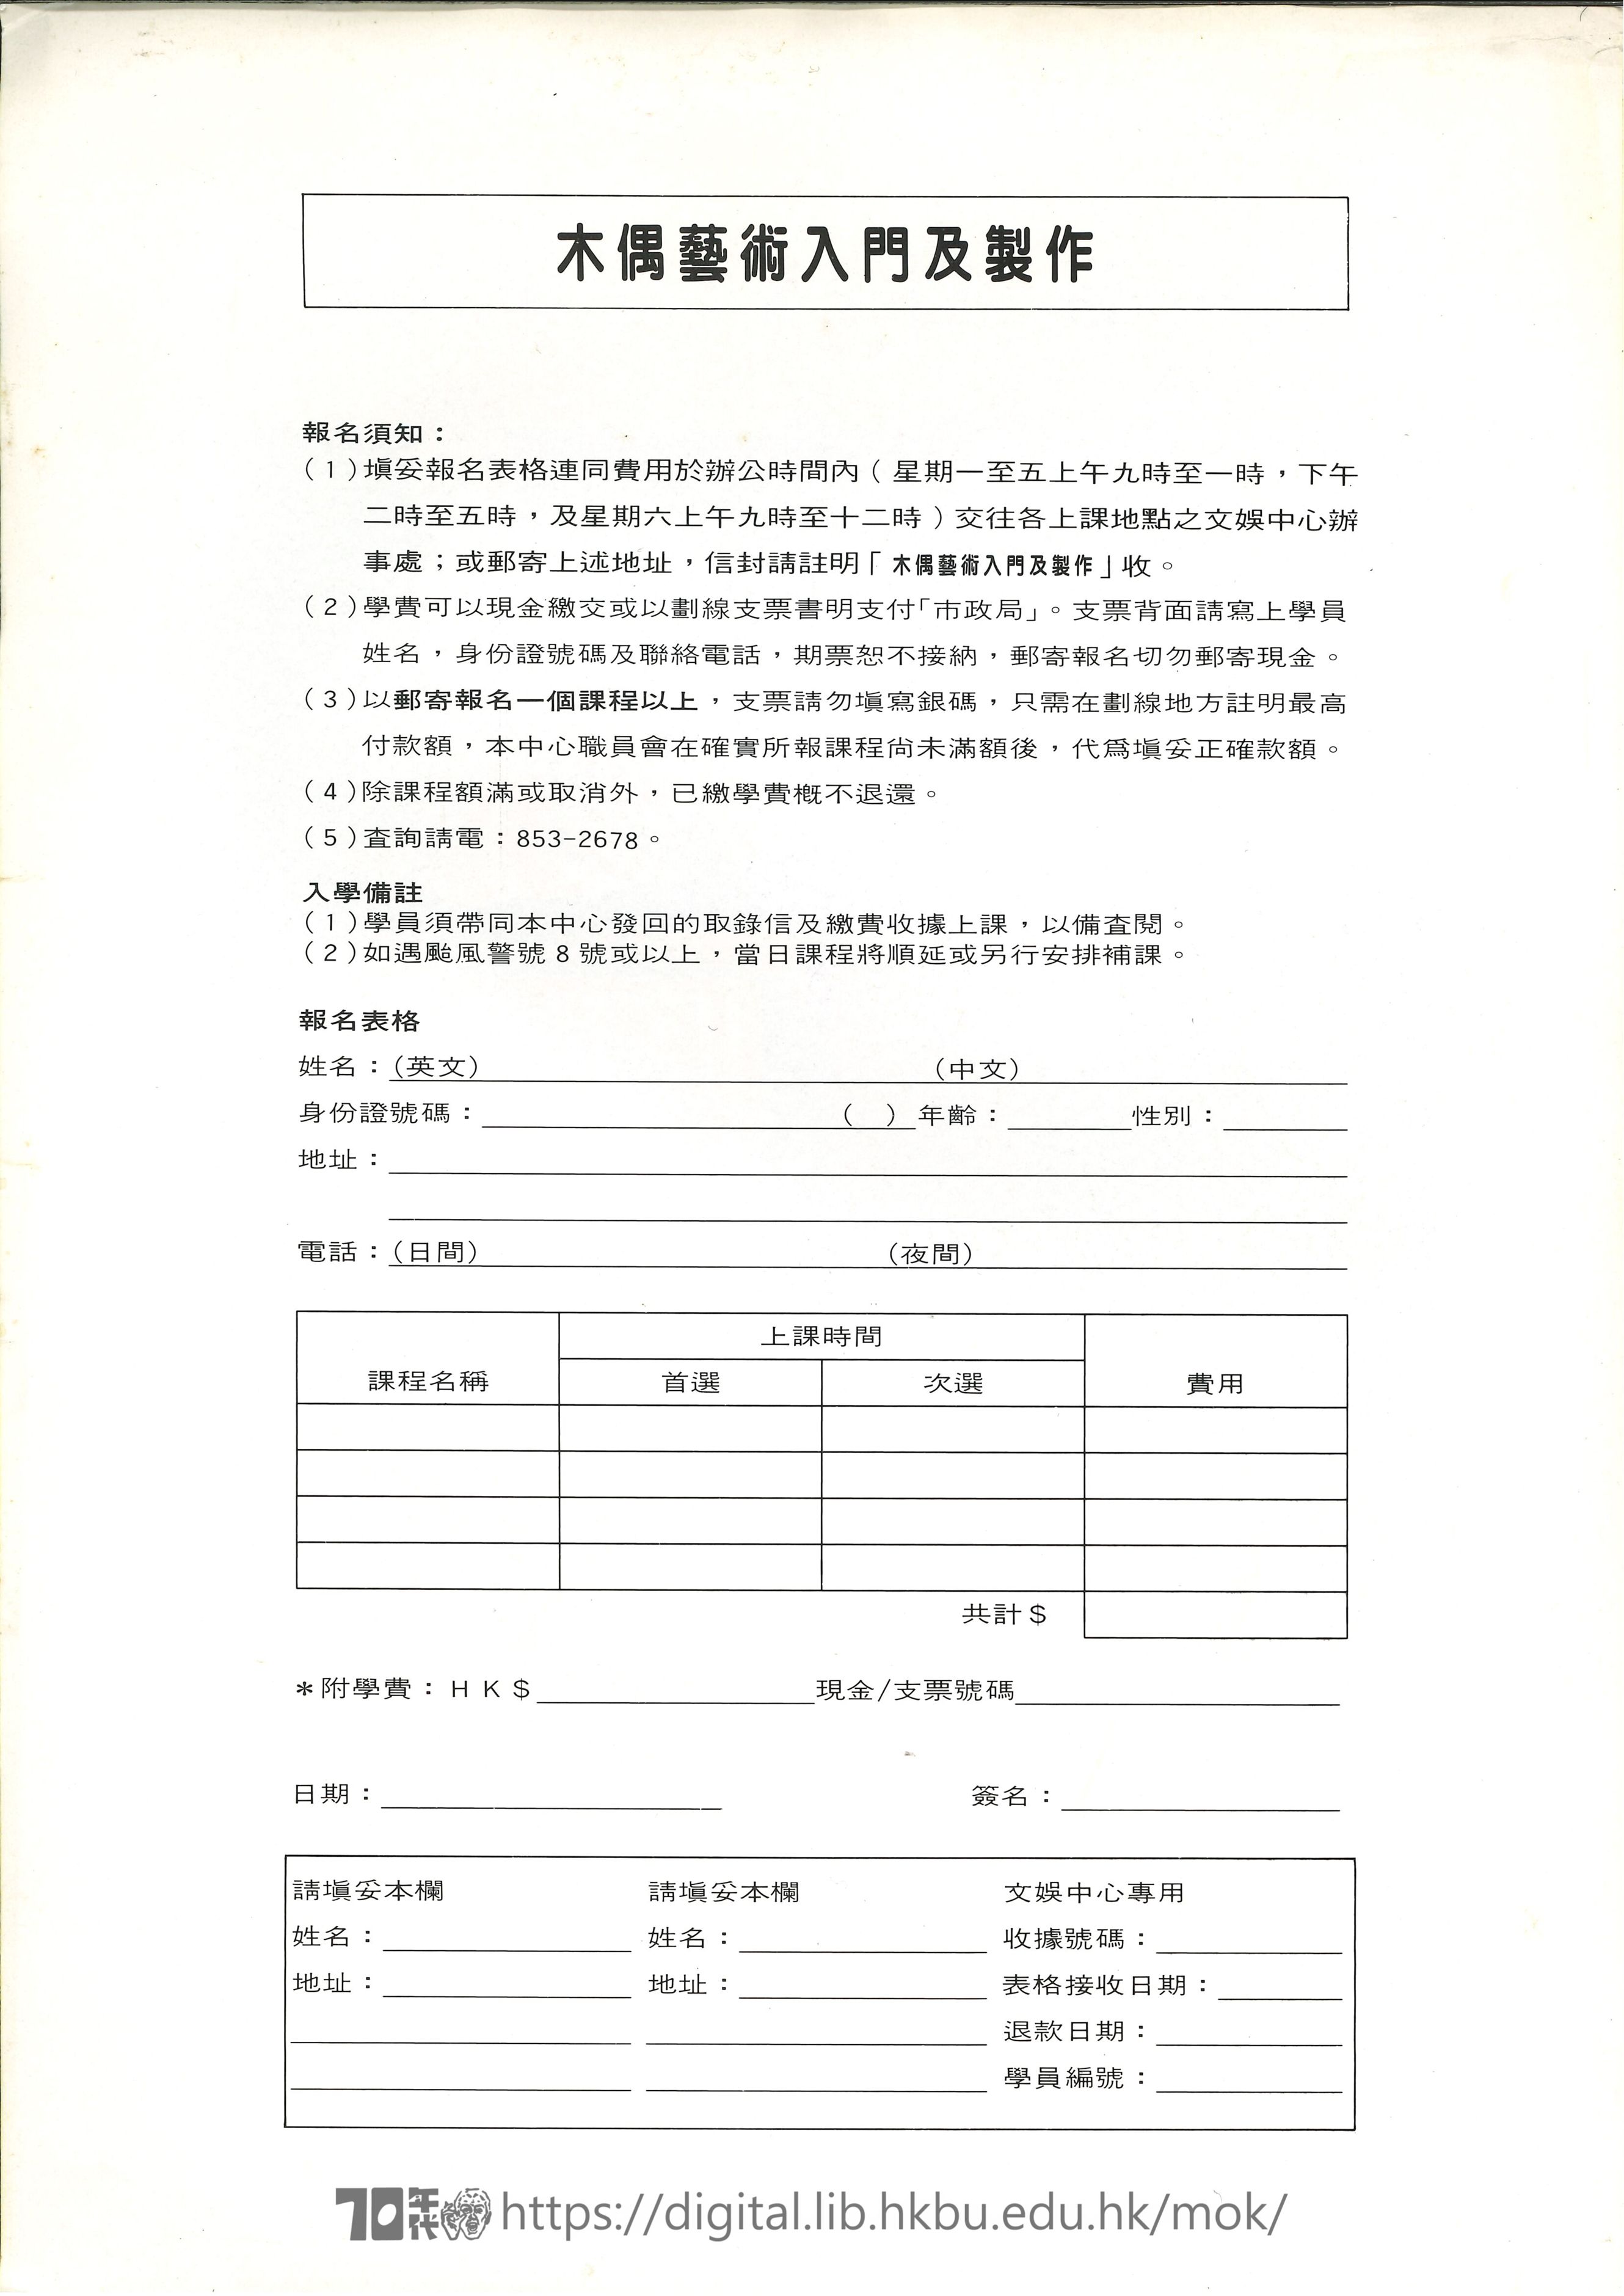 Puppet theatre  Information and registration form for workshop organised by Hong Kong Arts Centre and Asian Theatre Festival Society  